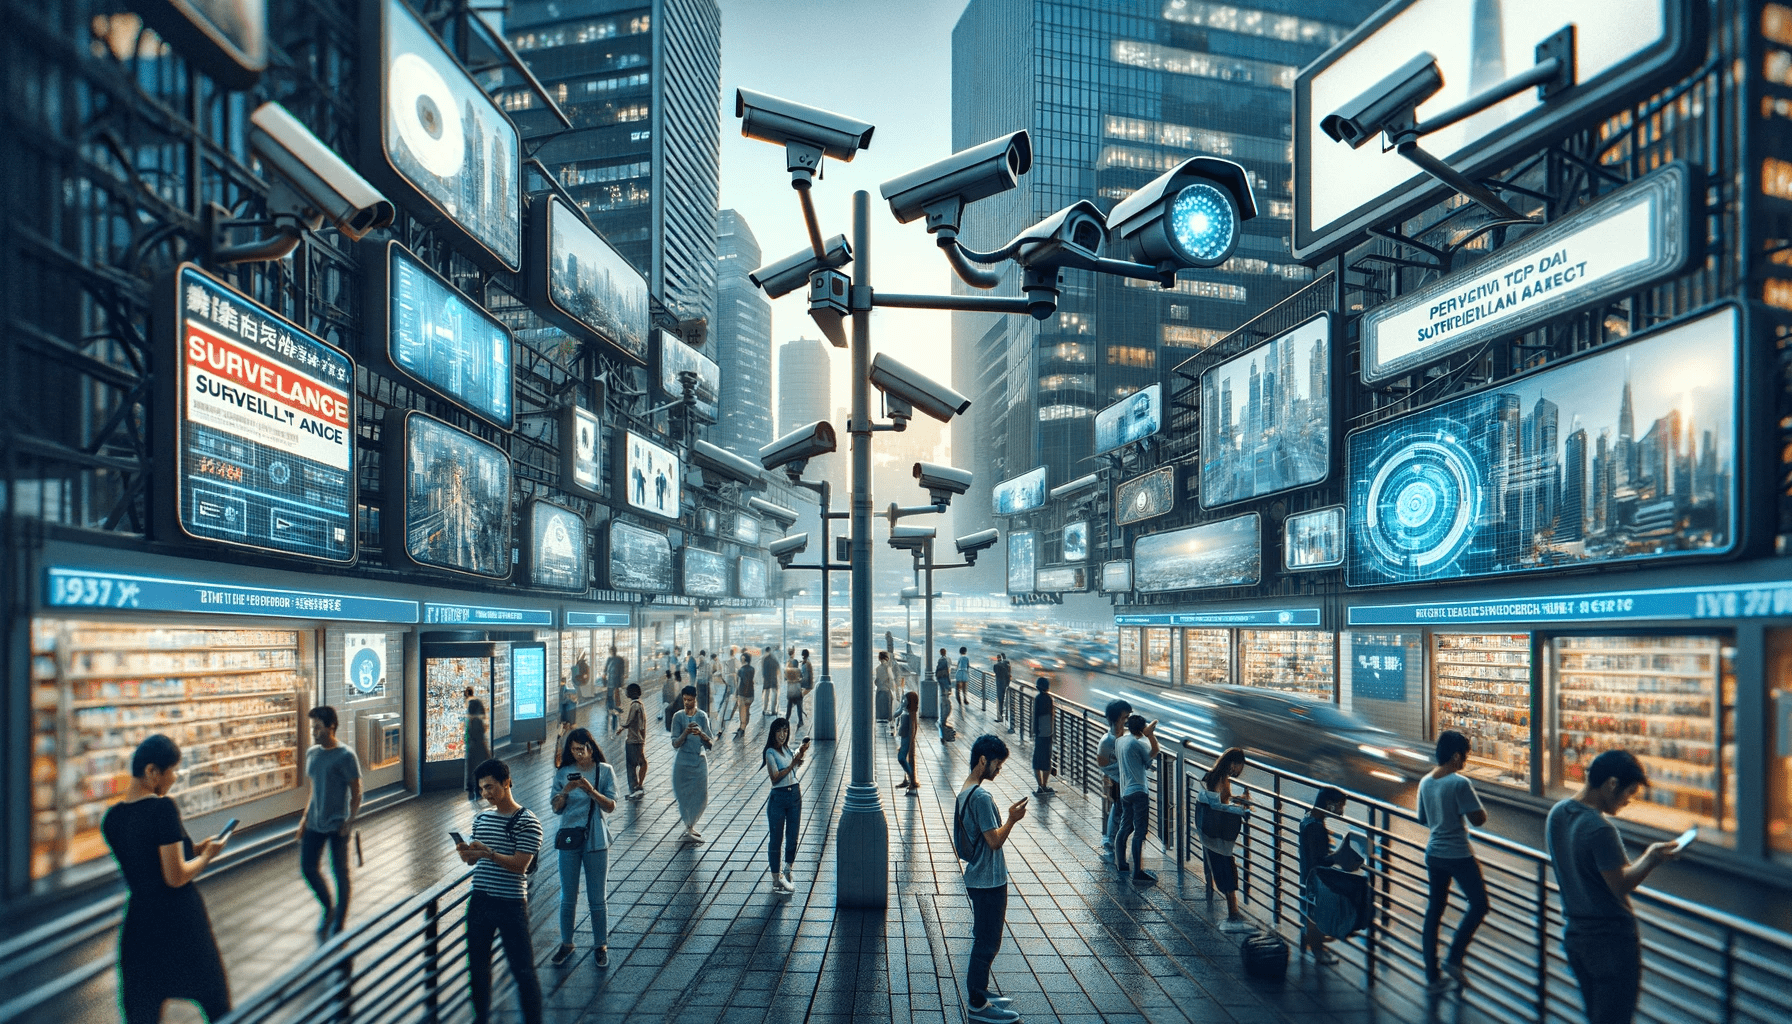 A modern cityscape with numerous CCTV cameras and digital screens displaying ads and surveillance notices, symbolizing pervasive digital surveillance